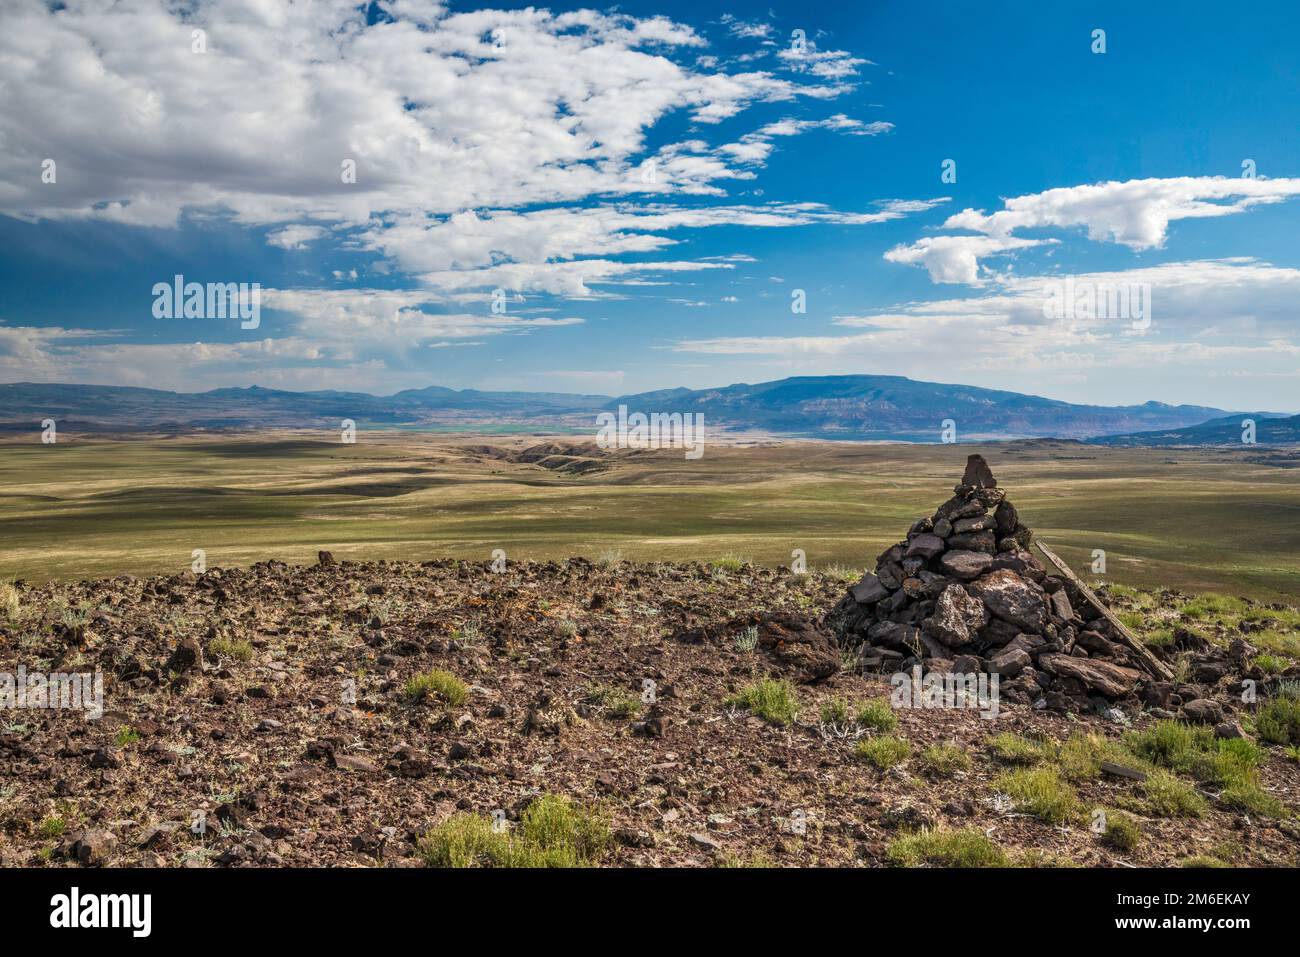 Rock Cairn a Smooth Knoll, Fish Lake Mtns in Distance, Awapa Plateau, Posey Lake Road (FR 154), vicino a Bicknell, Utah, USA Foto Stock